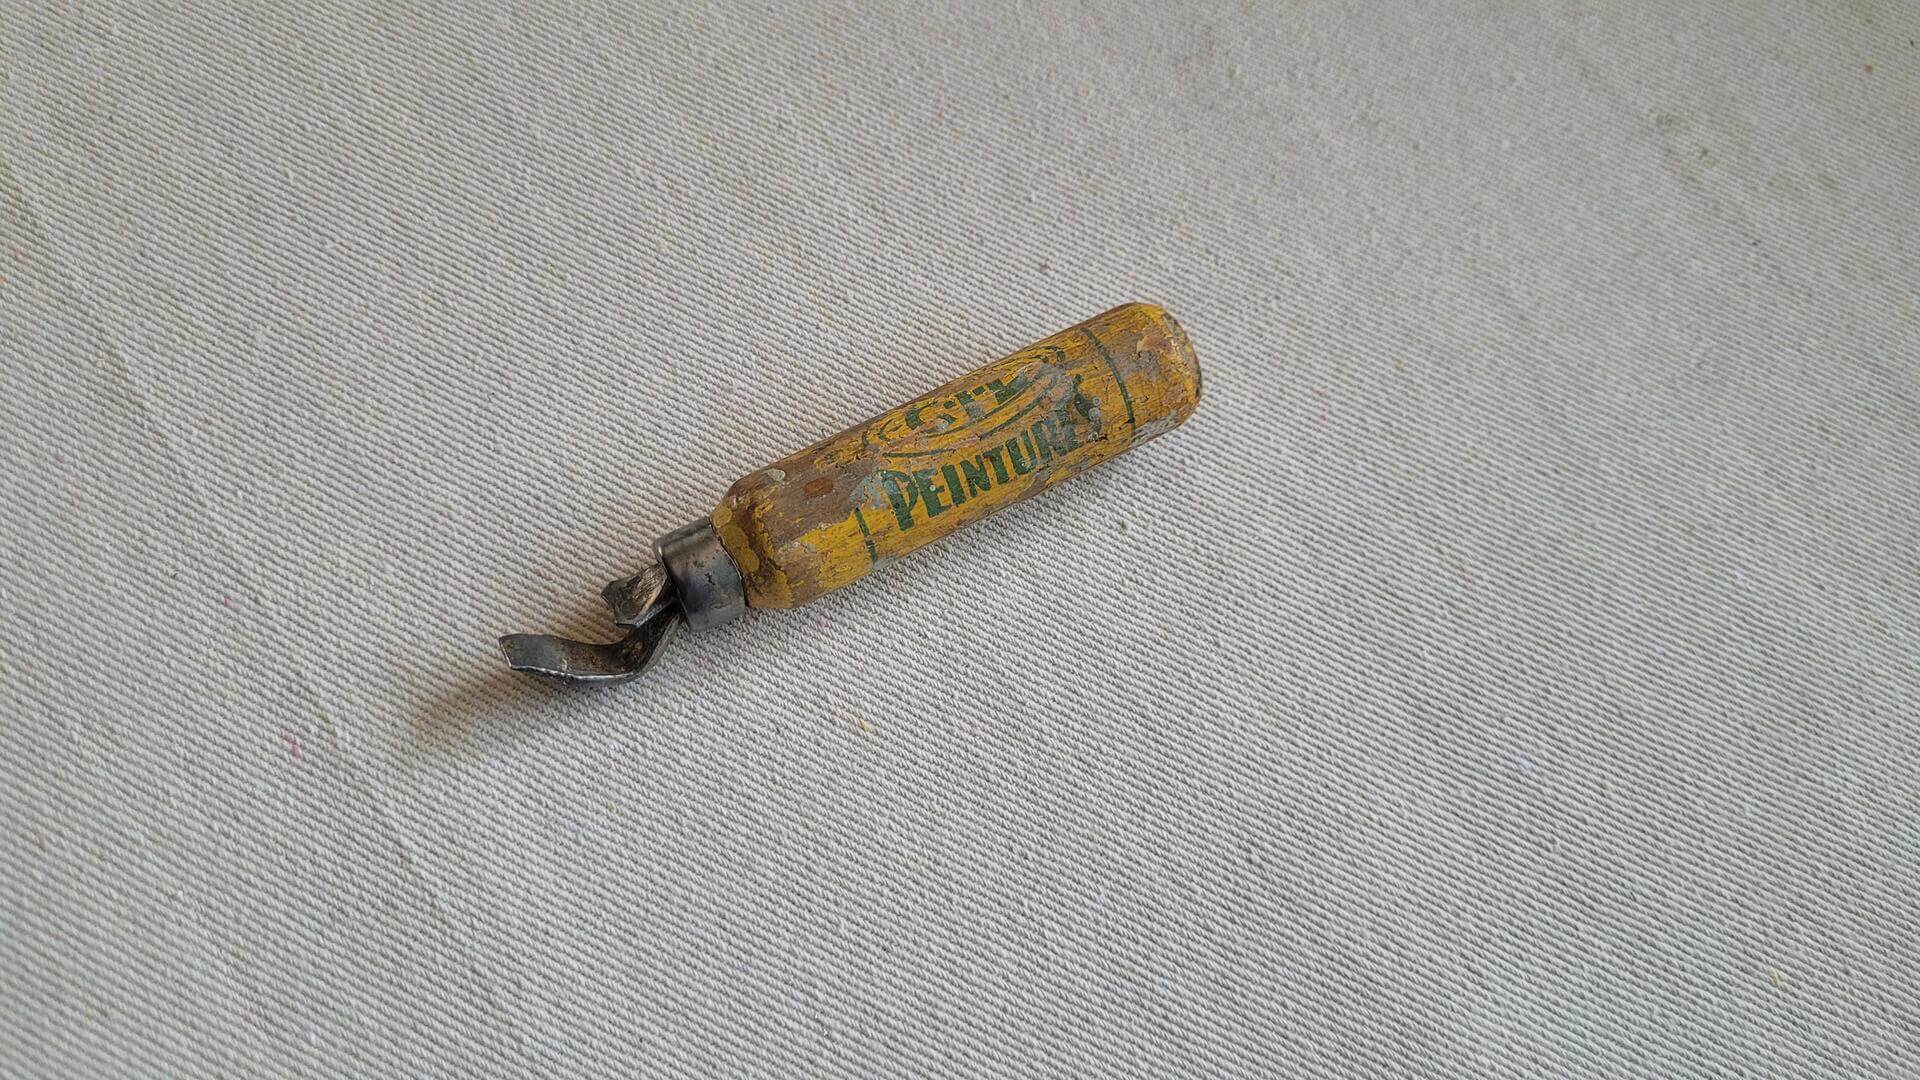 Rare antique CIL Peintures paint can opener personalized for Lacroix Ferronnerie hardware store from Lachine, a borough within the city of Montreal. Vintage made in Canada collectible artist and painter tools